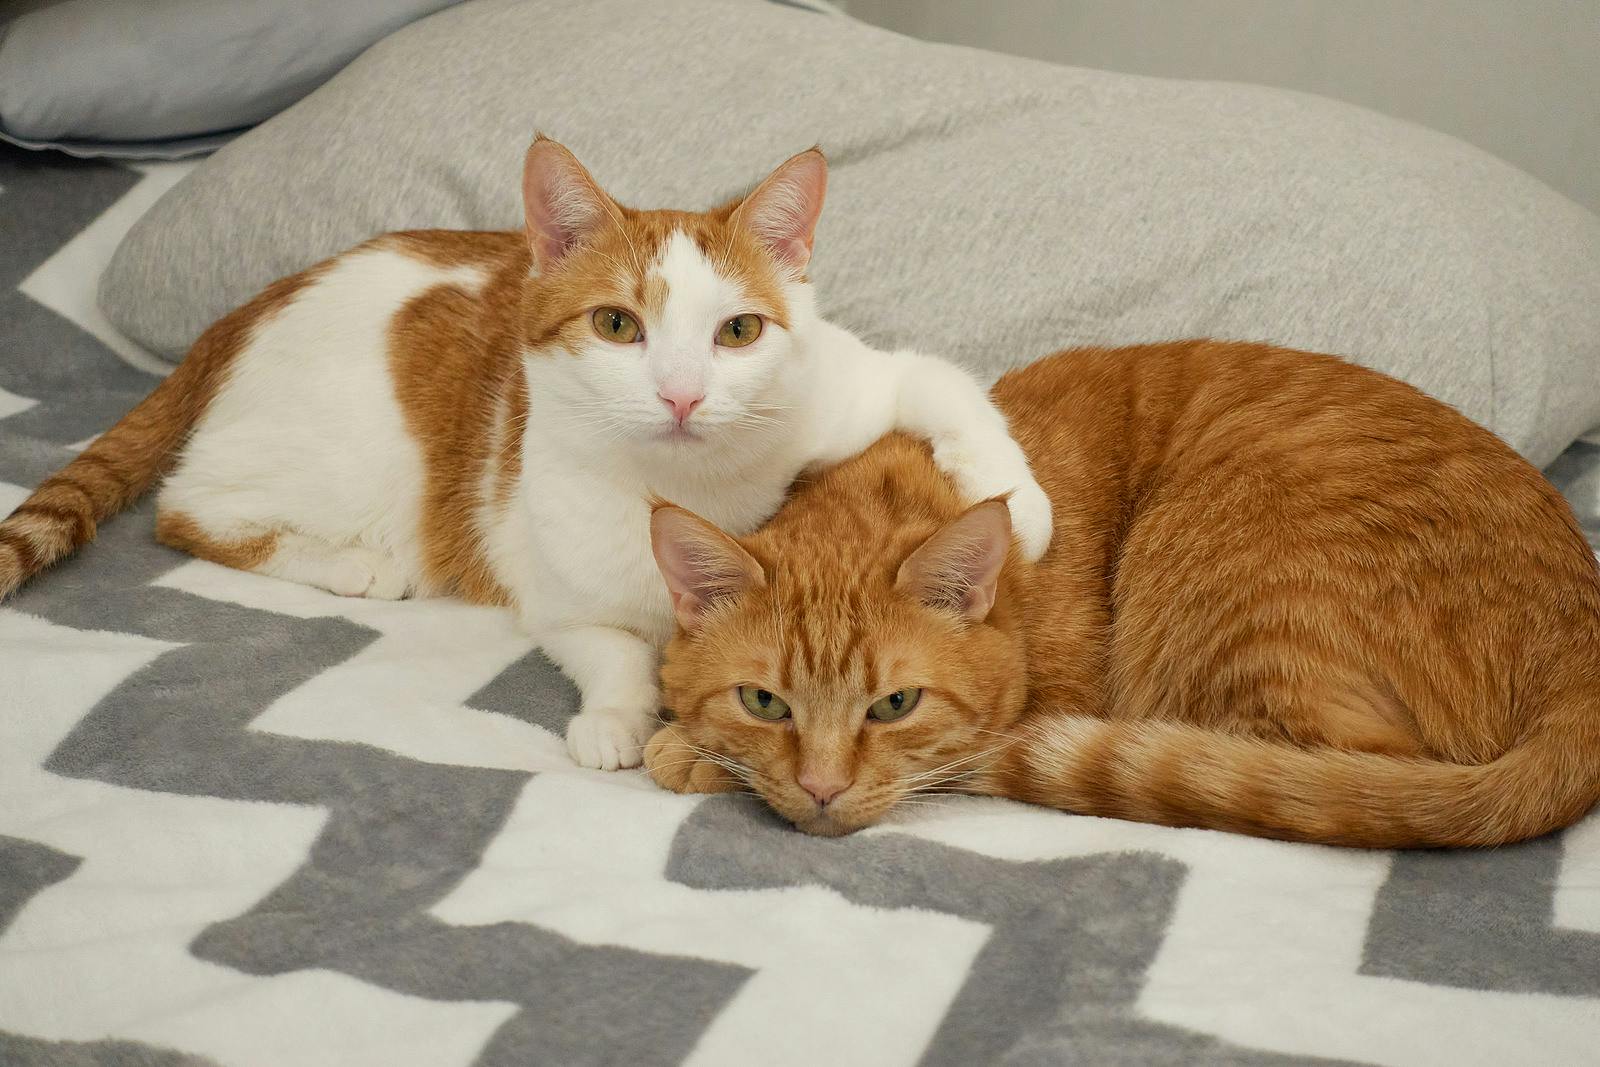 cats snuffling on a bed next to a pillow